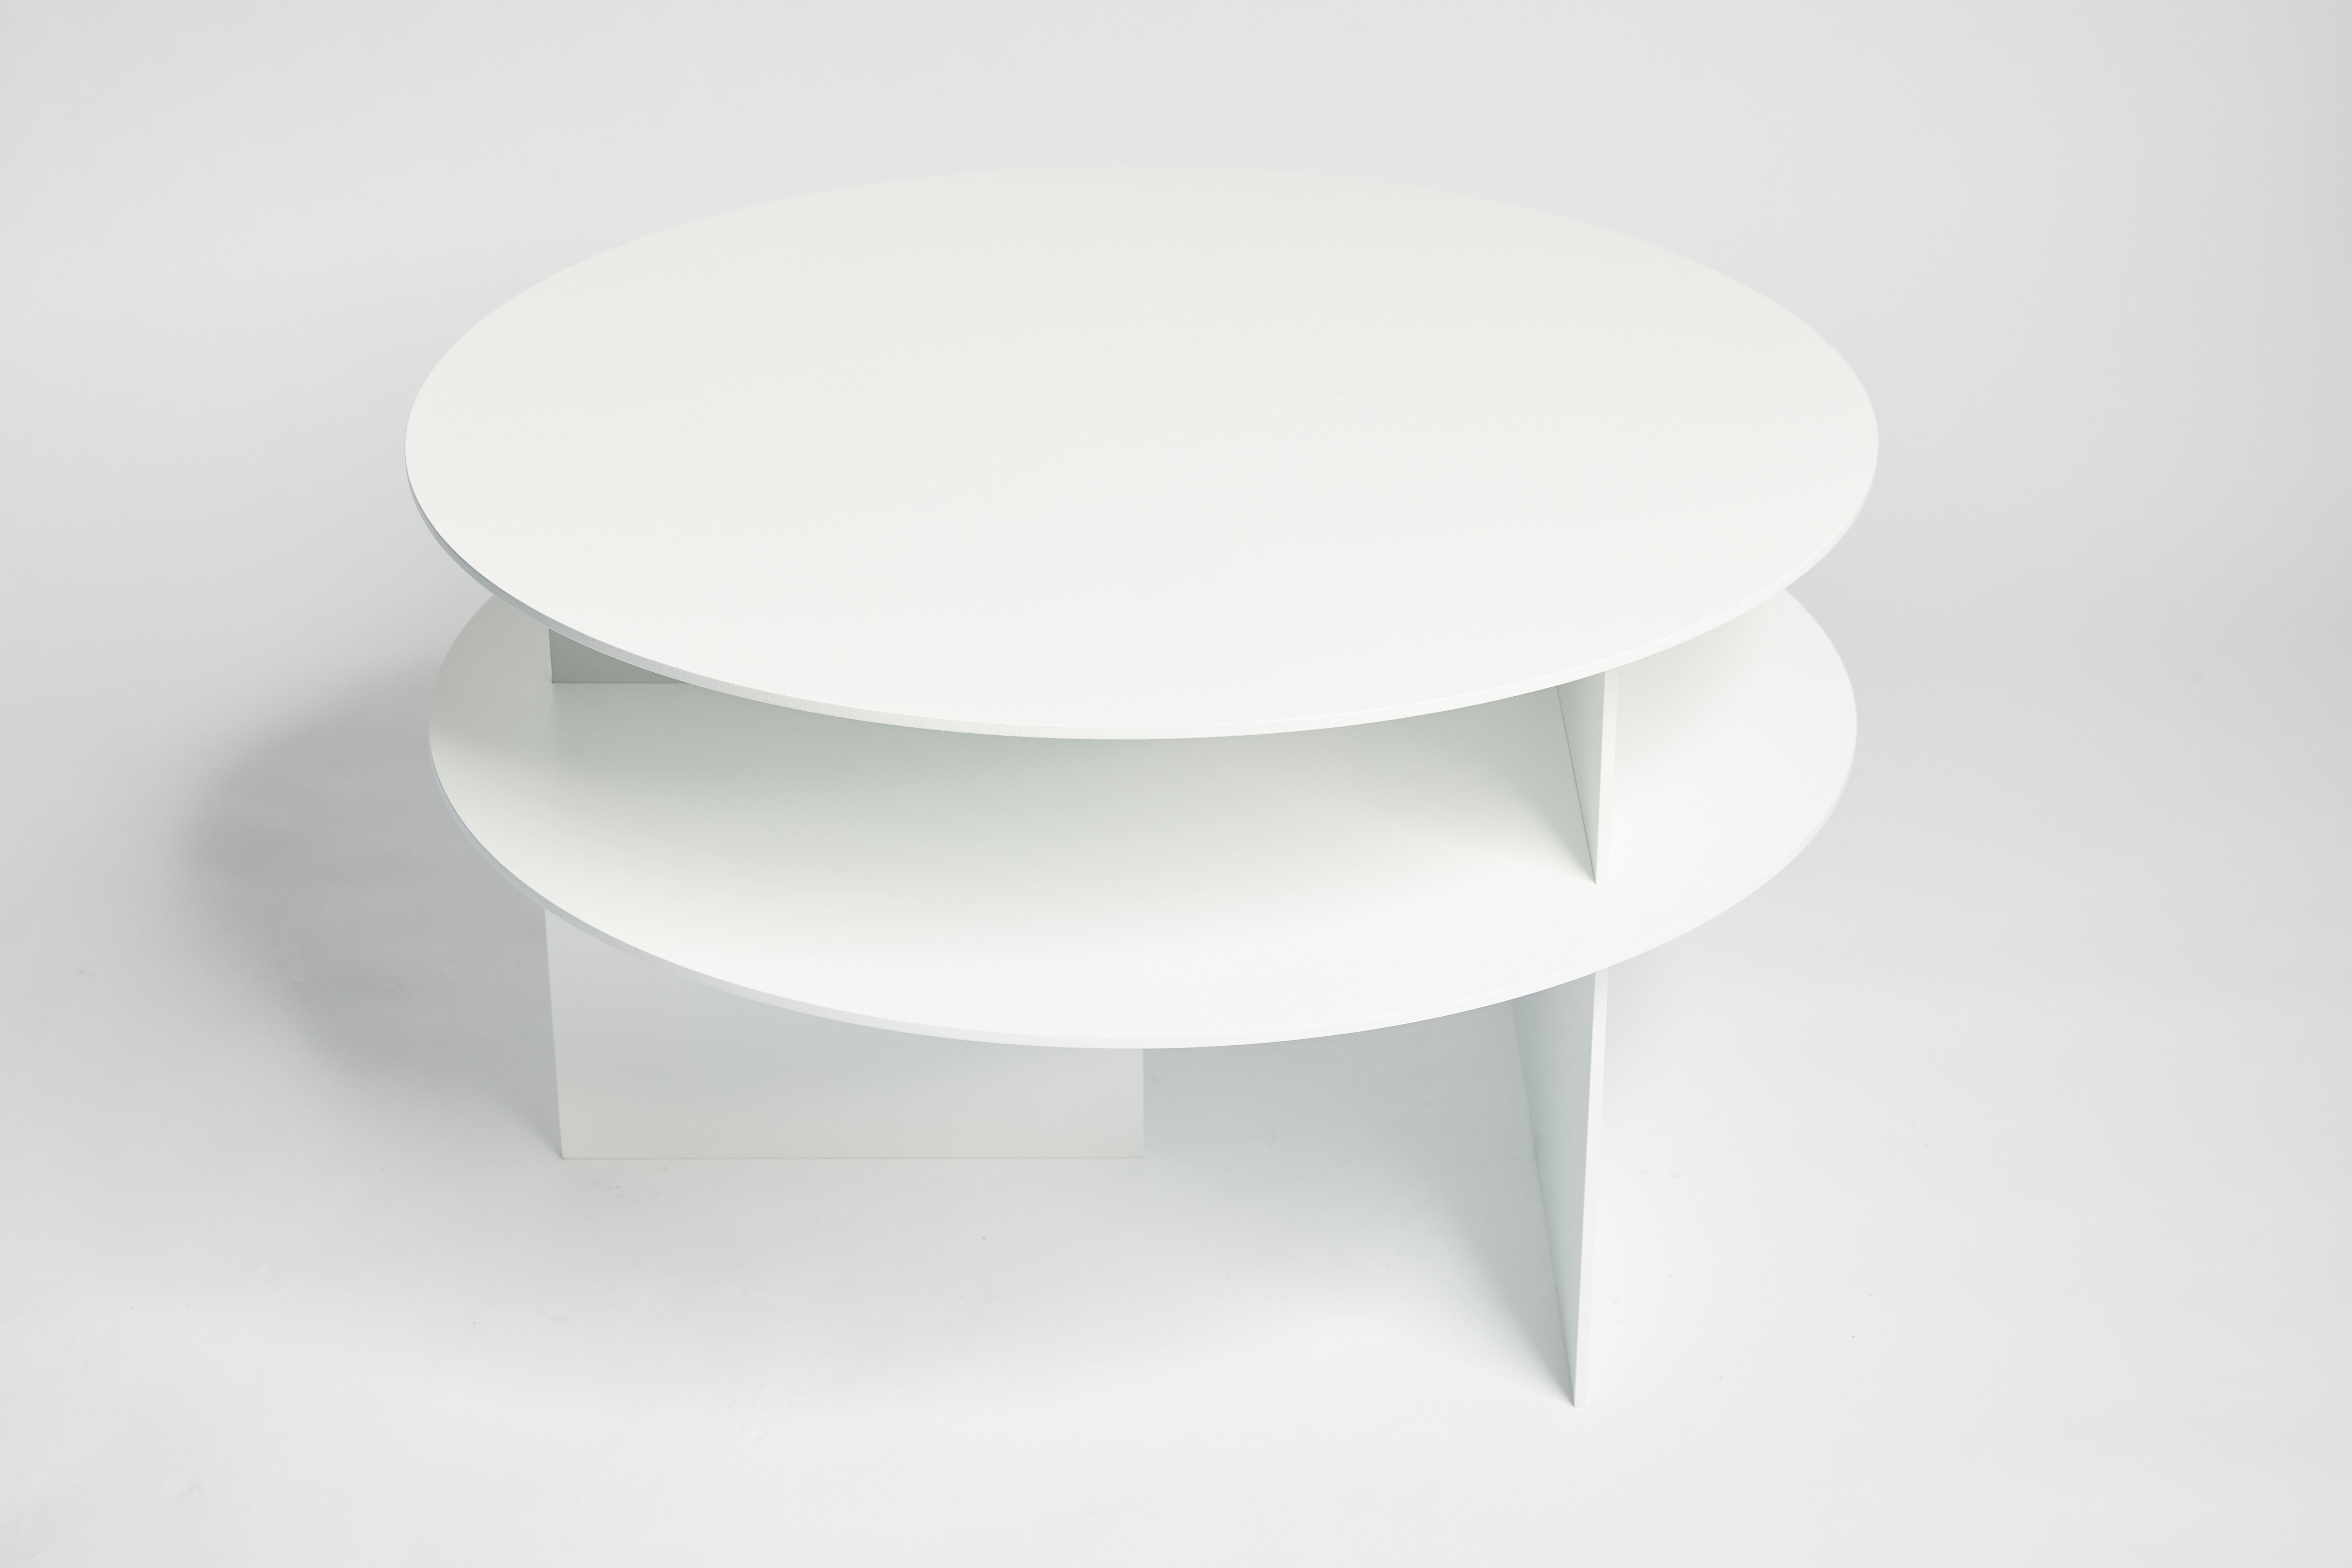 Sanora coffee table by Ben Barber Studio
Dimensions: Ø 76.2 x 45.72 cm
Materials: Aluminum powder coat

Custom sizing upon request.
Custom finishes upon request.

Two-teir table constructed from precision cut 1/4” aluminium. Powder-coated to